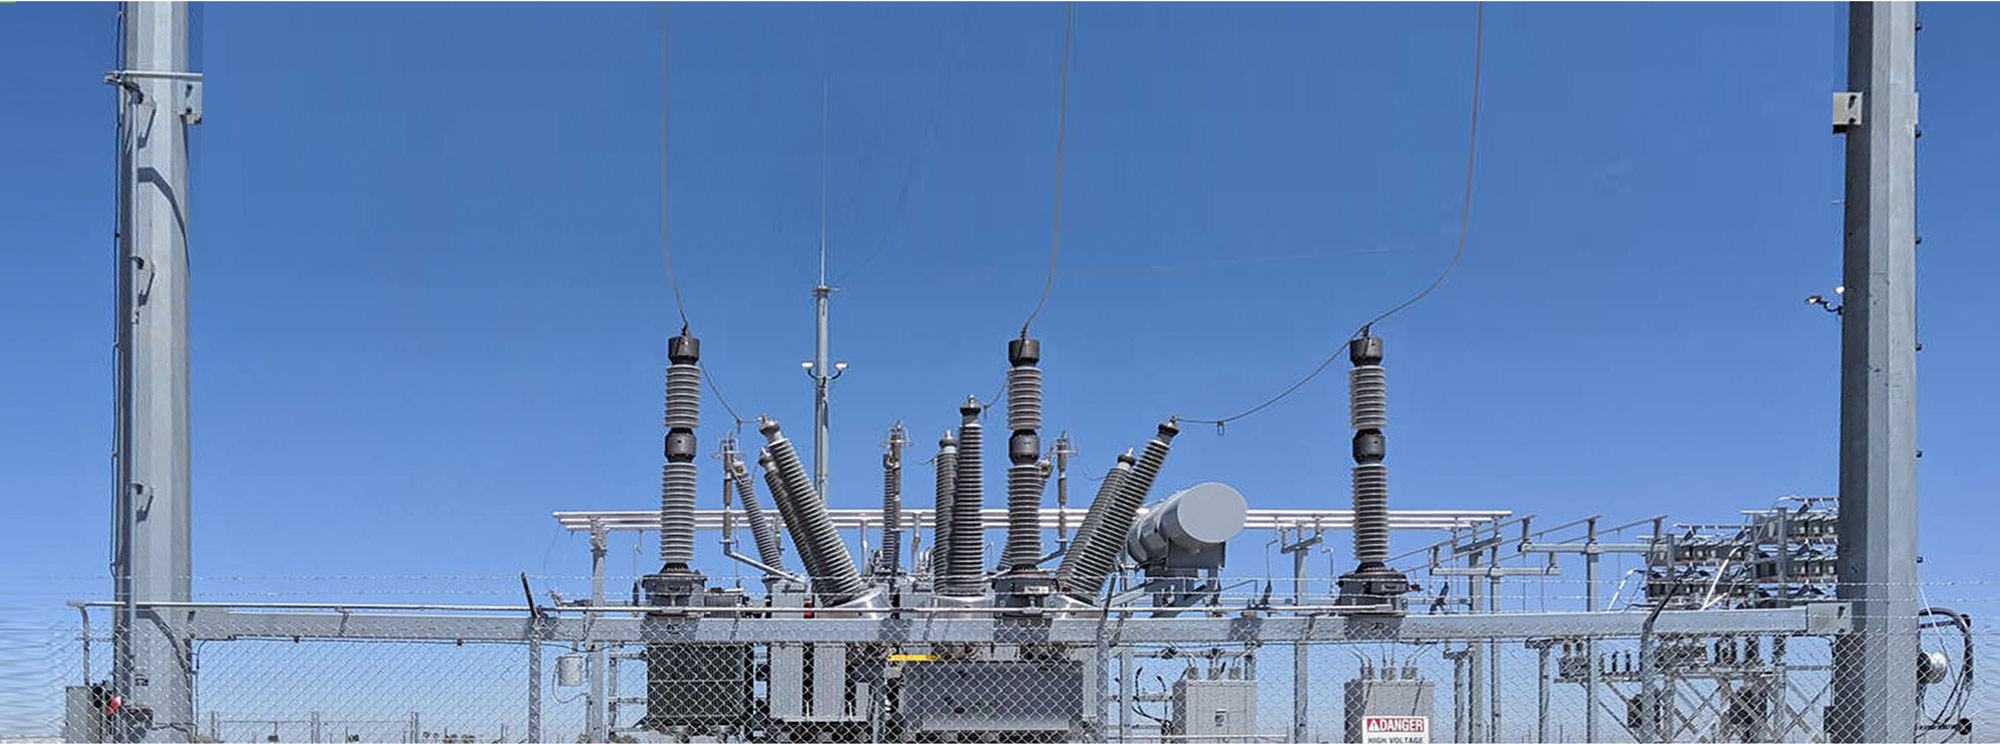 photo of a high voltage substation behind a fence with a blue sky backround